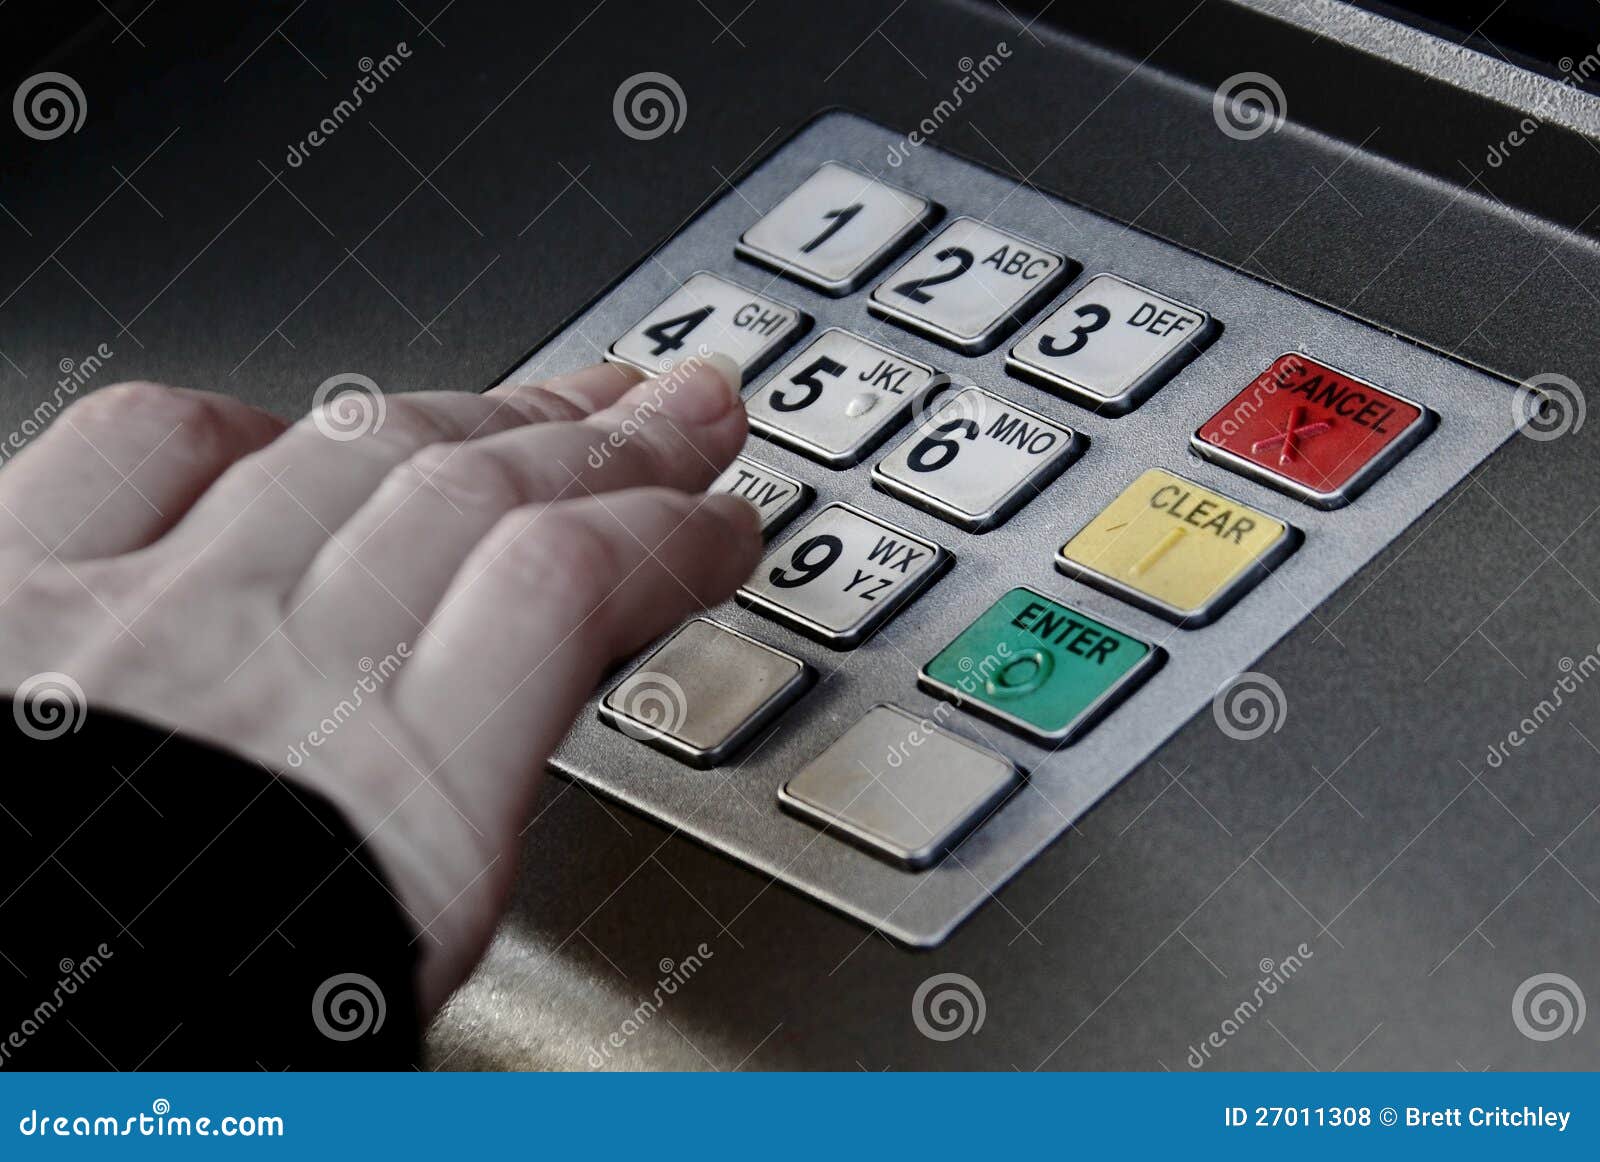 atm machine pin buttons security